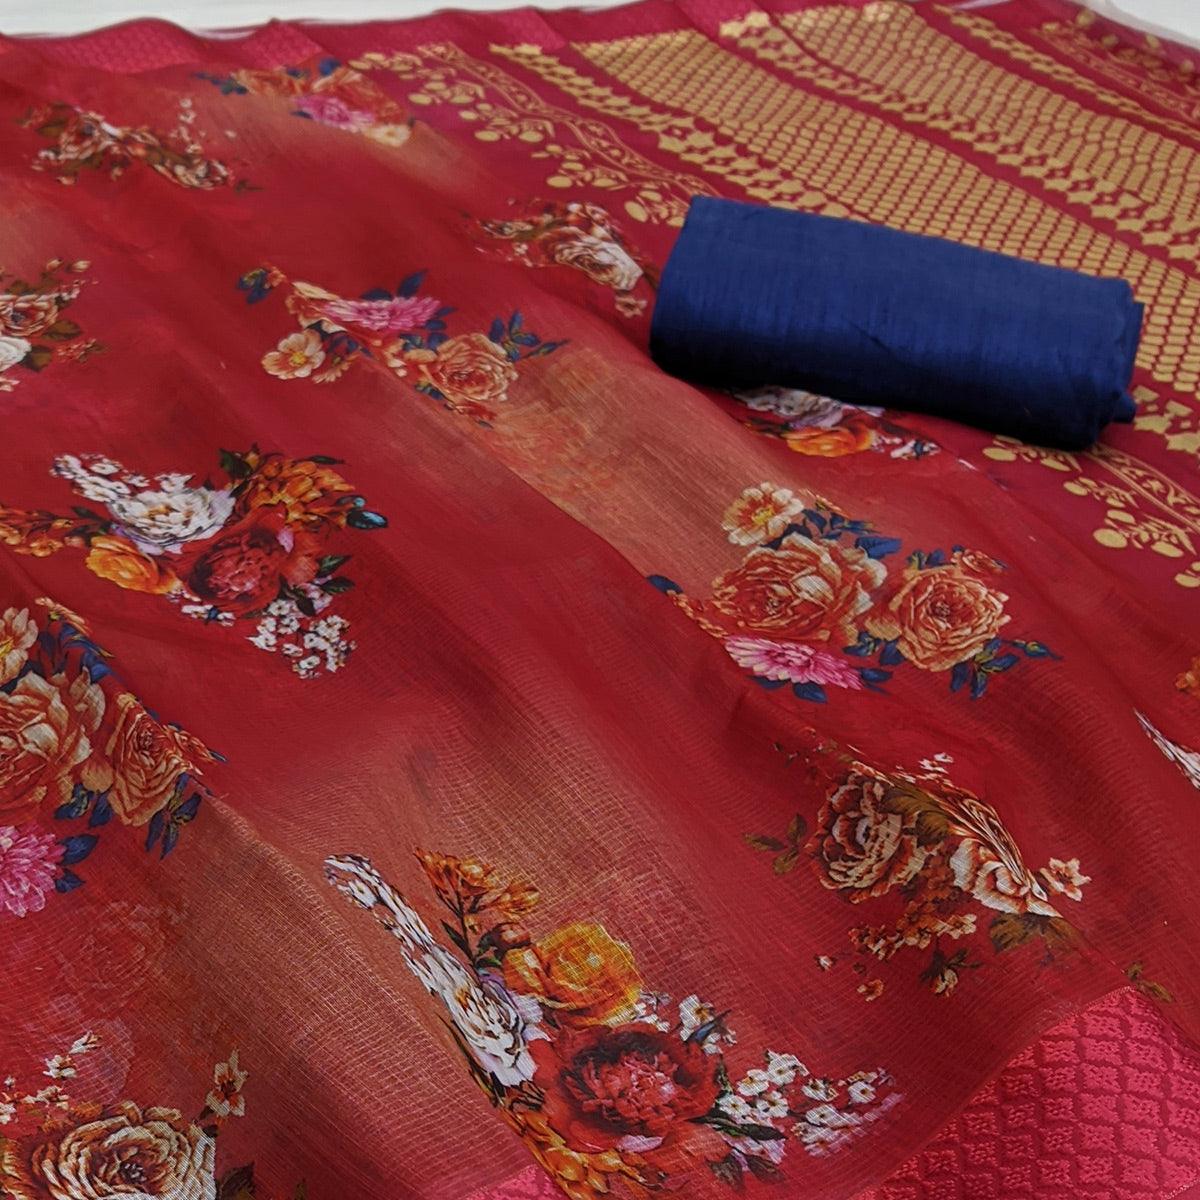 Maroon Festive Wear Floral Digital Printed With Woven Border Soft Cotton Saree - Peachmode